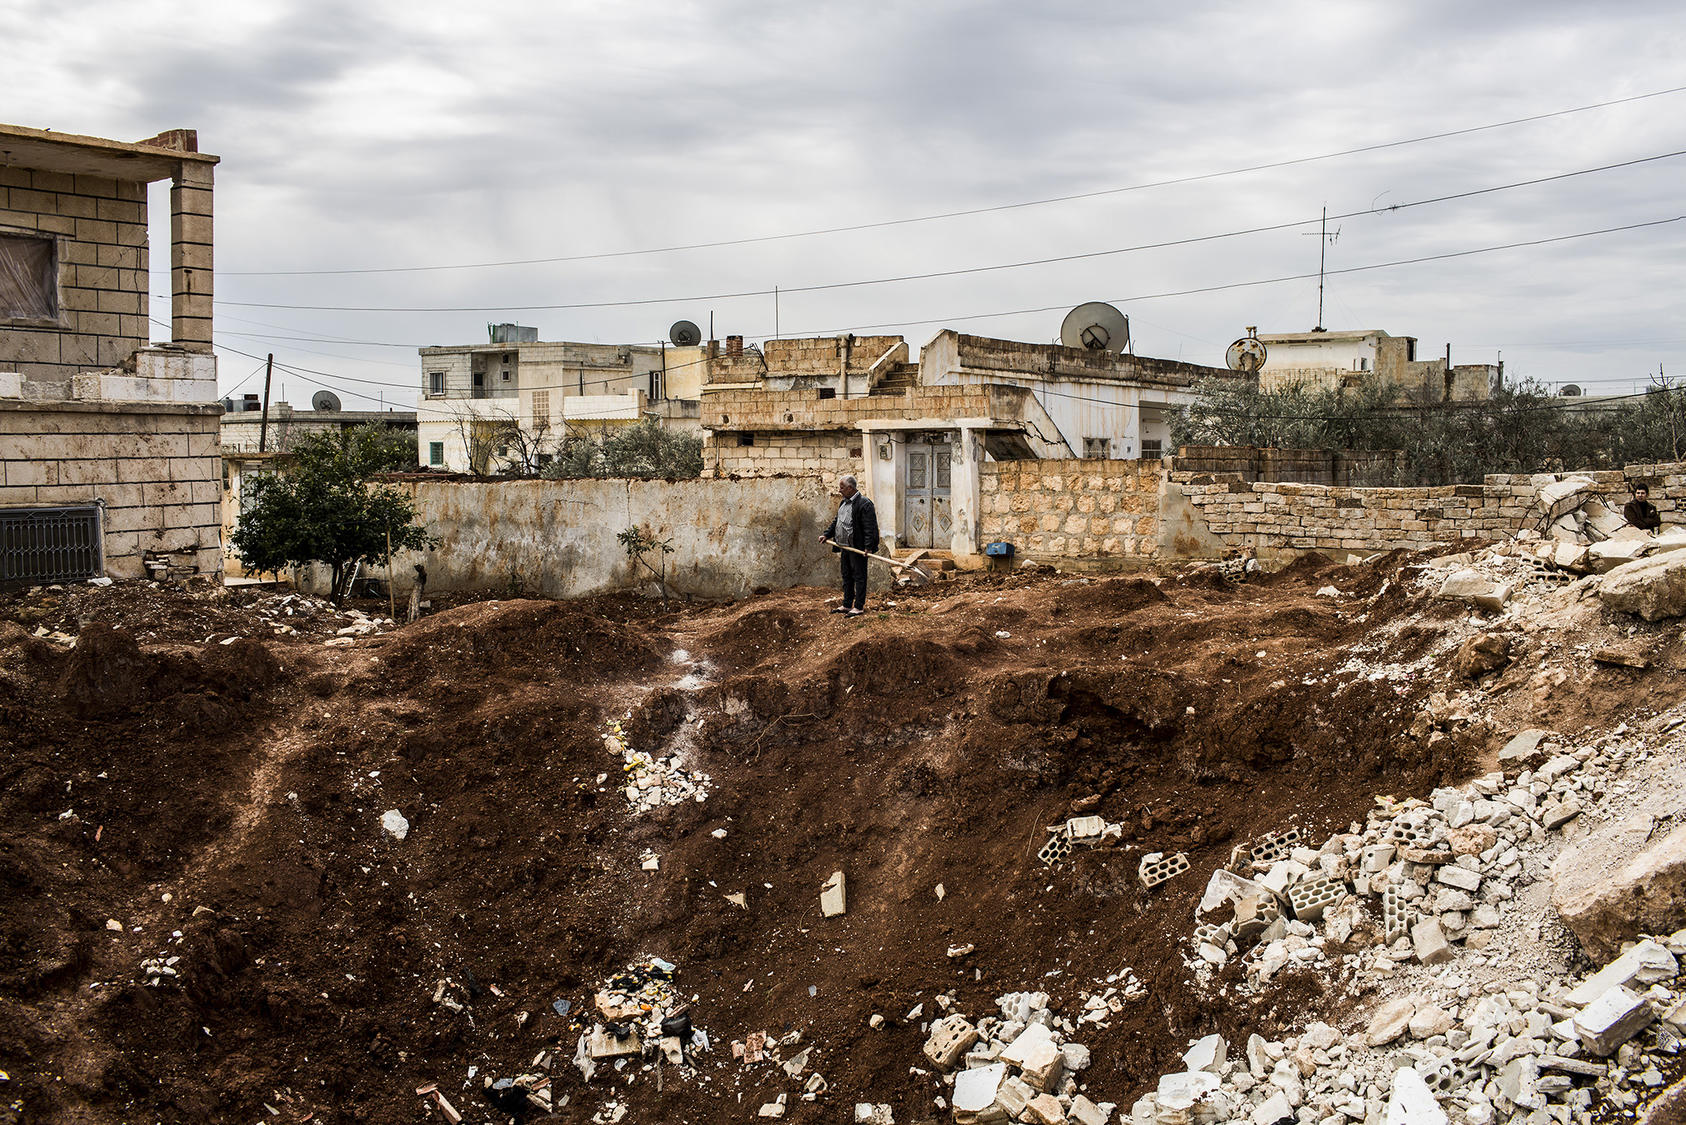 A man holding a shovel surveys a crater left by what locals said was a Scud missile strike in Shilakh, in Syria’s Idlib province, March 8, 2013. Scuds aimed by President Bashar Assad’s military at rebel-held areas in the early years of the Syrian civil war killed scores of people, many of them civilians. (Bryan Denton/The New York Times)